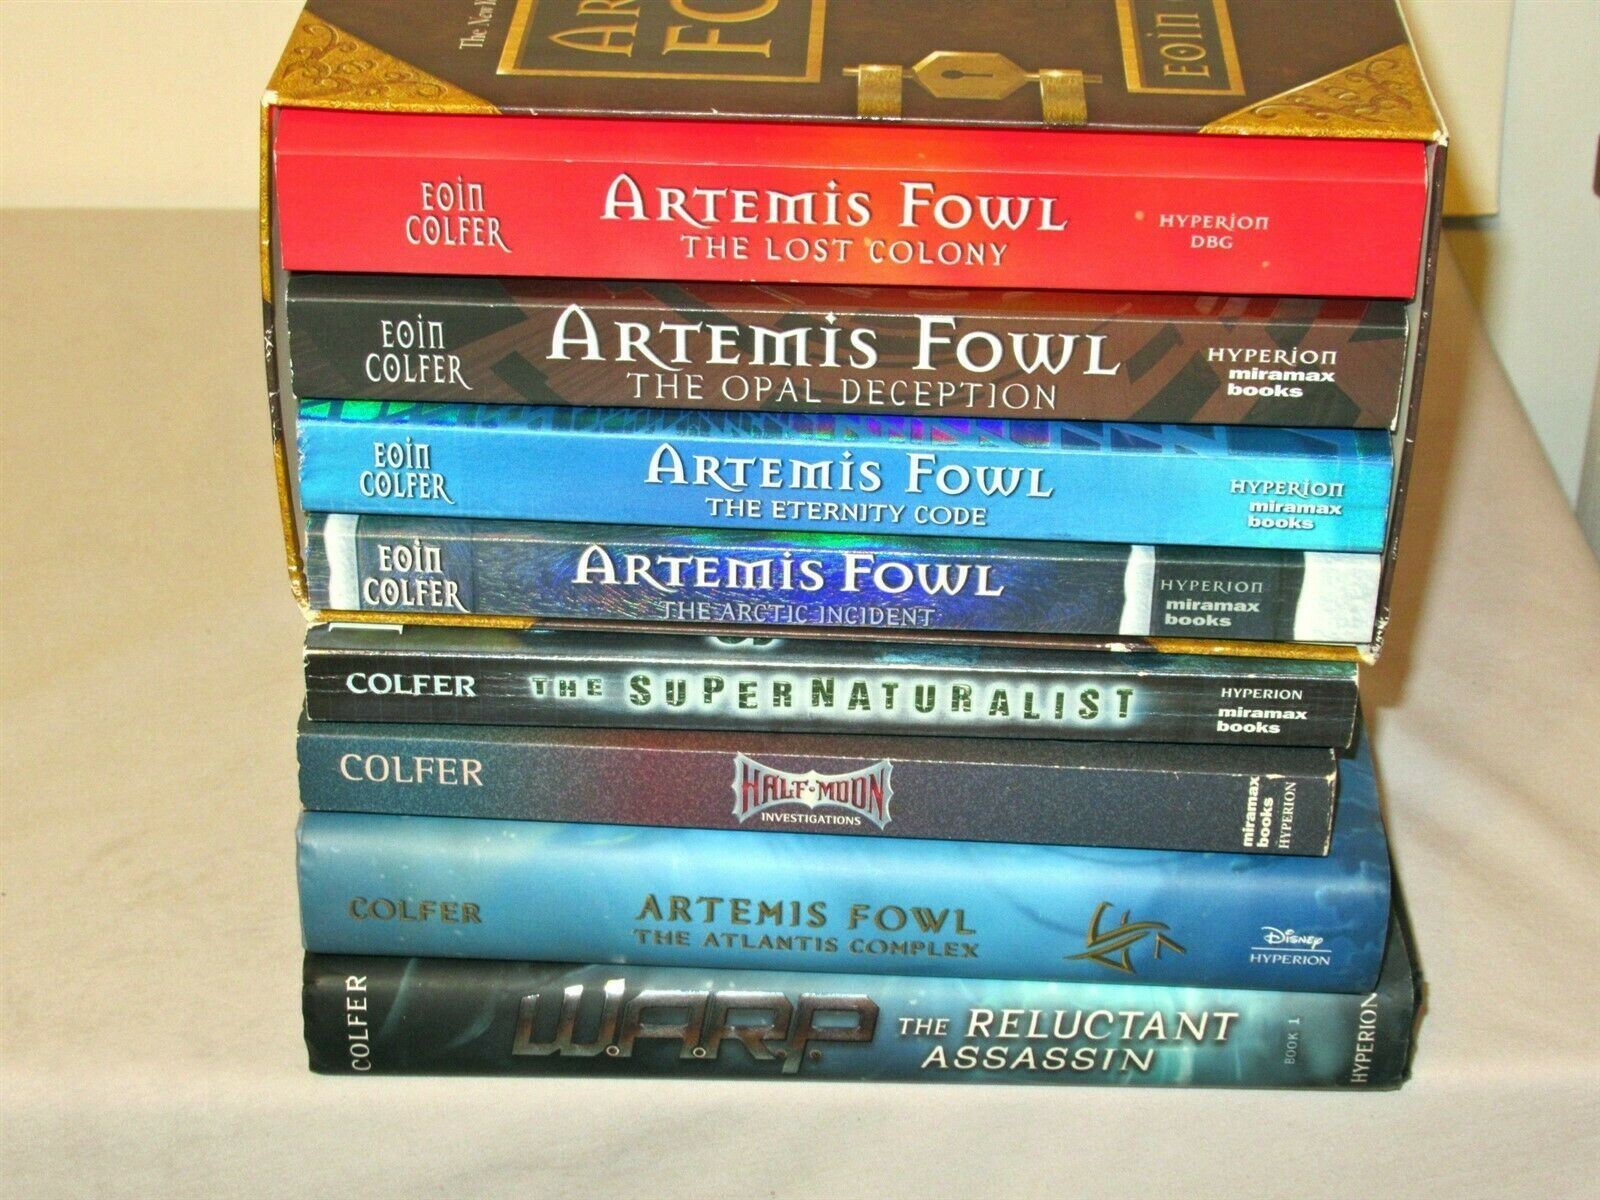 Lot 8 Pb Hc Eoin Colfer 25 7 Artemis Fowl with The Moon And Gamefowl